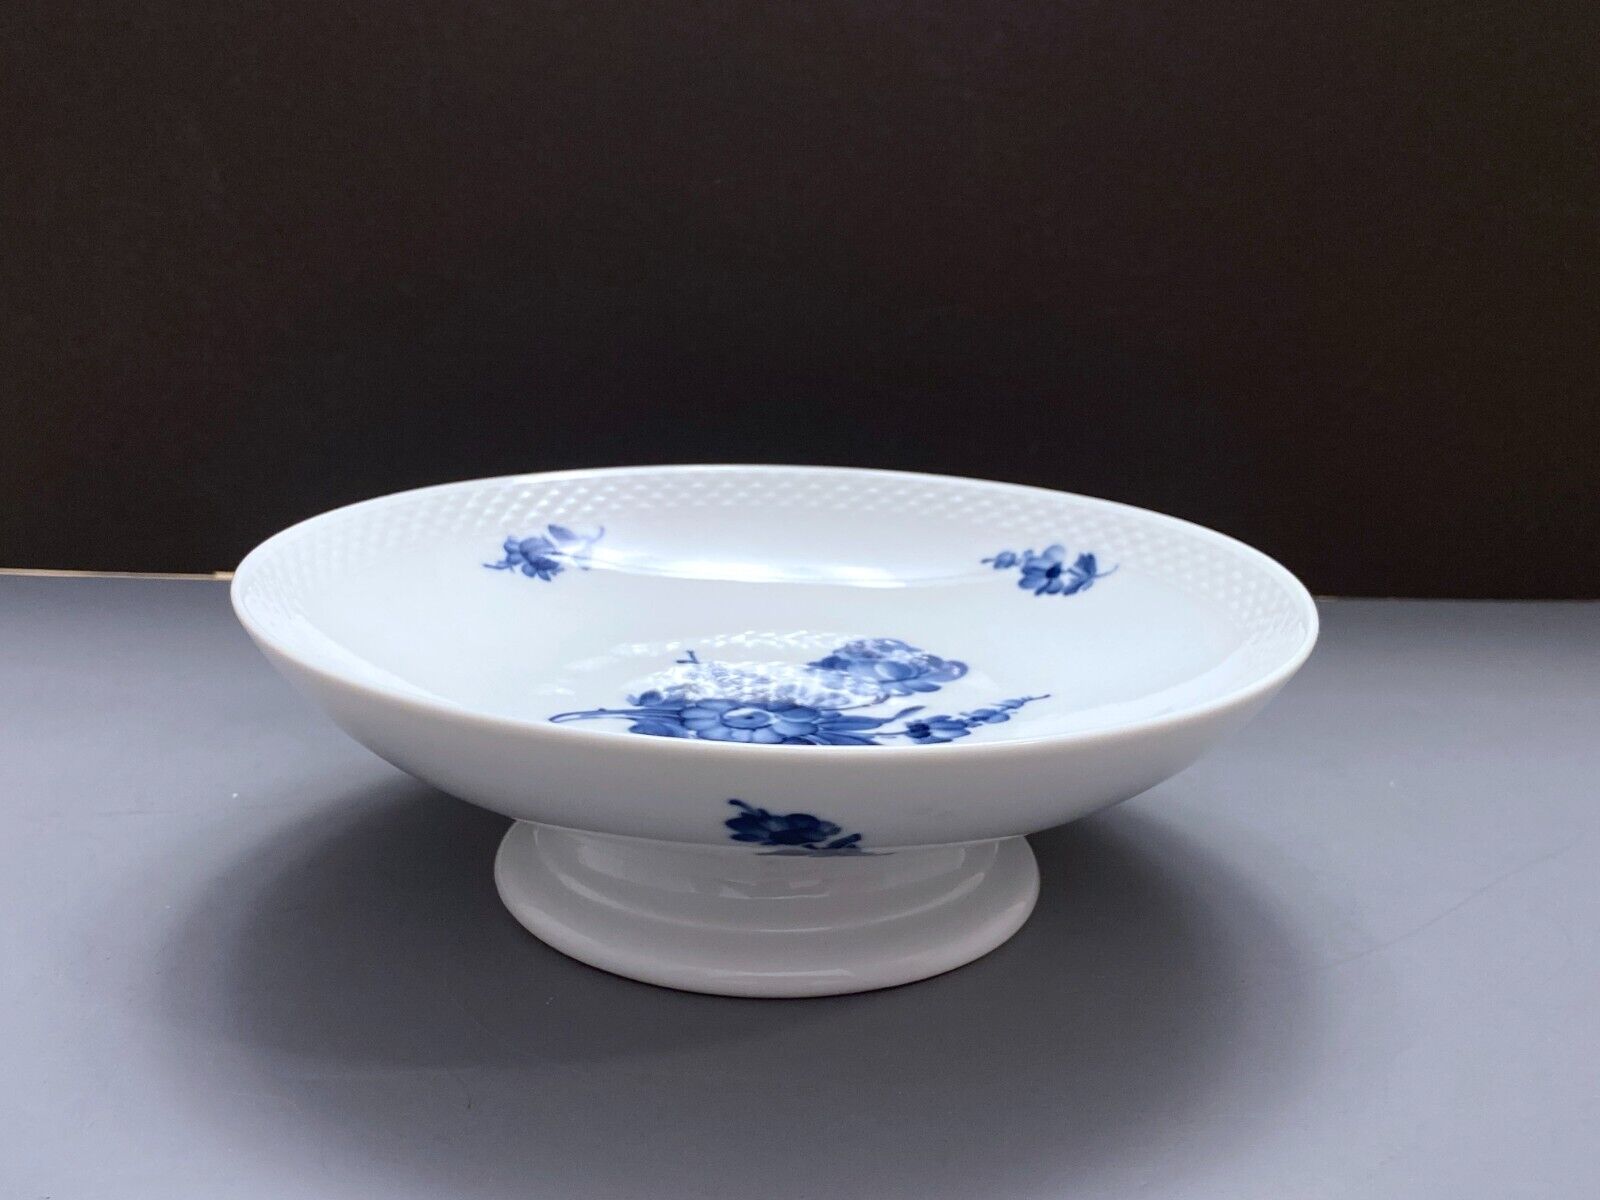 Royal Copenhagen Blue and white Flower Braided Compote Bowl, USA 